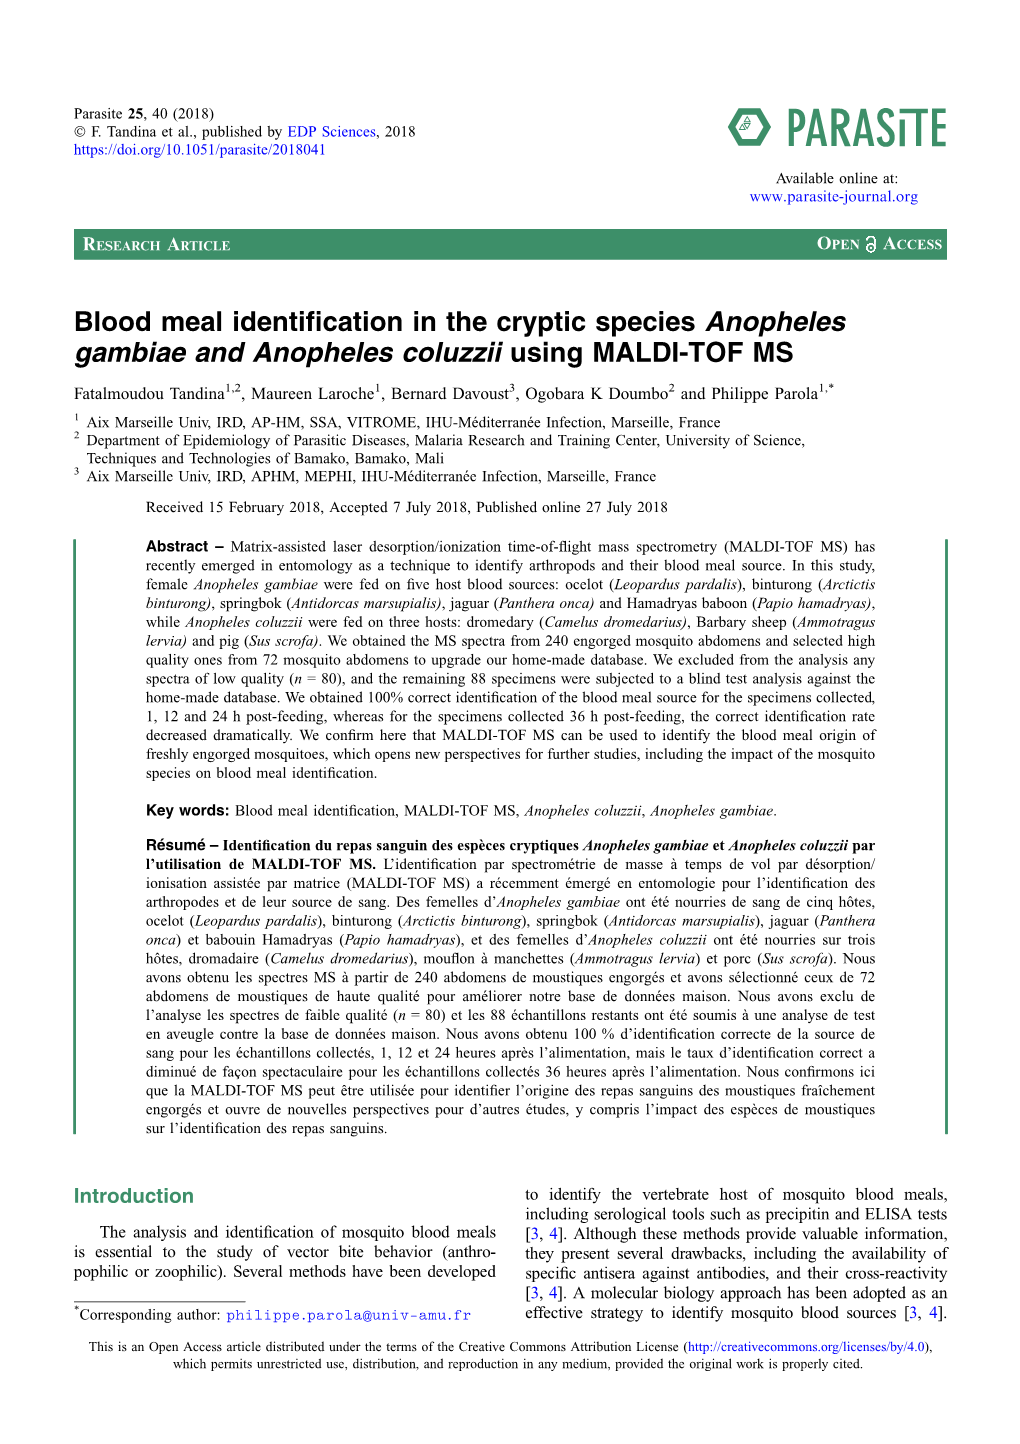 Blood Meal Identification in the Cryptic Species Anopheles Gambiae and Anopheles Coluzzii Using MALDI-TOF MS